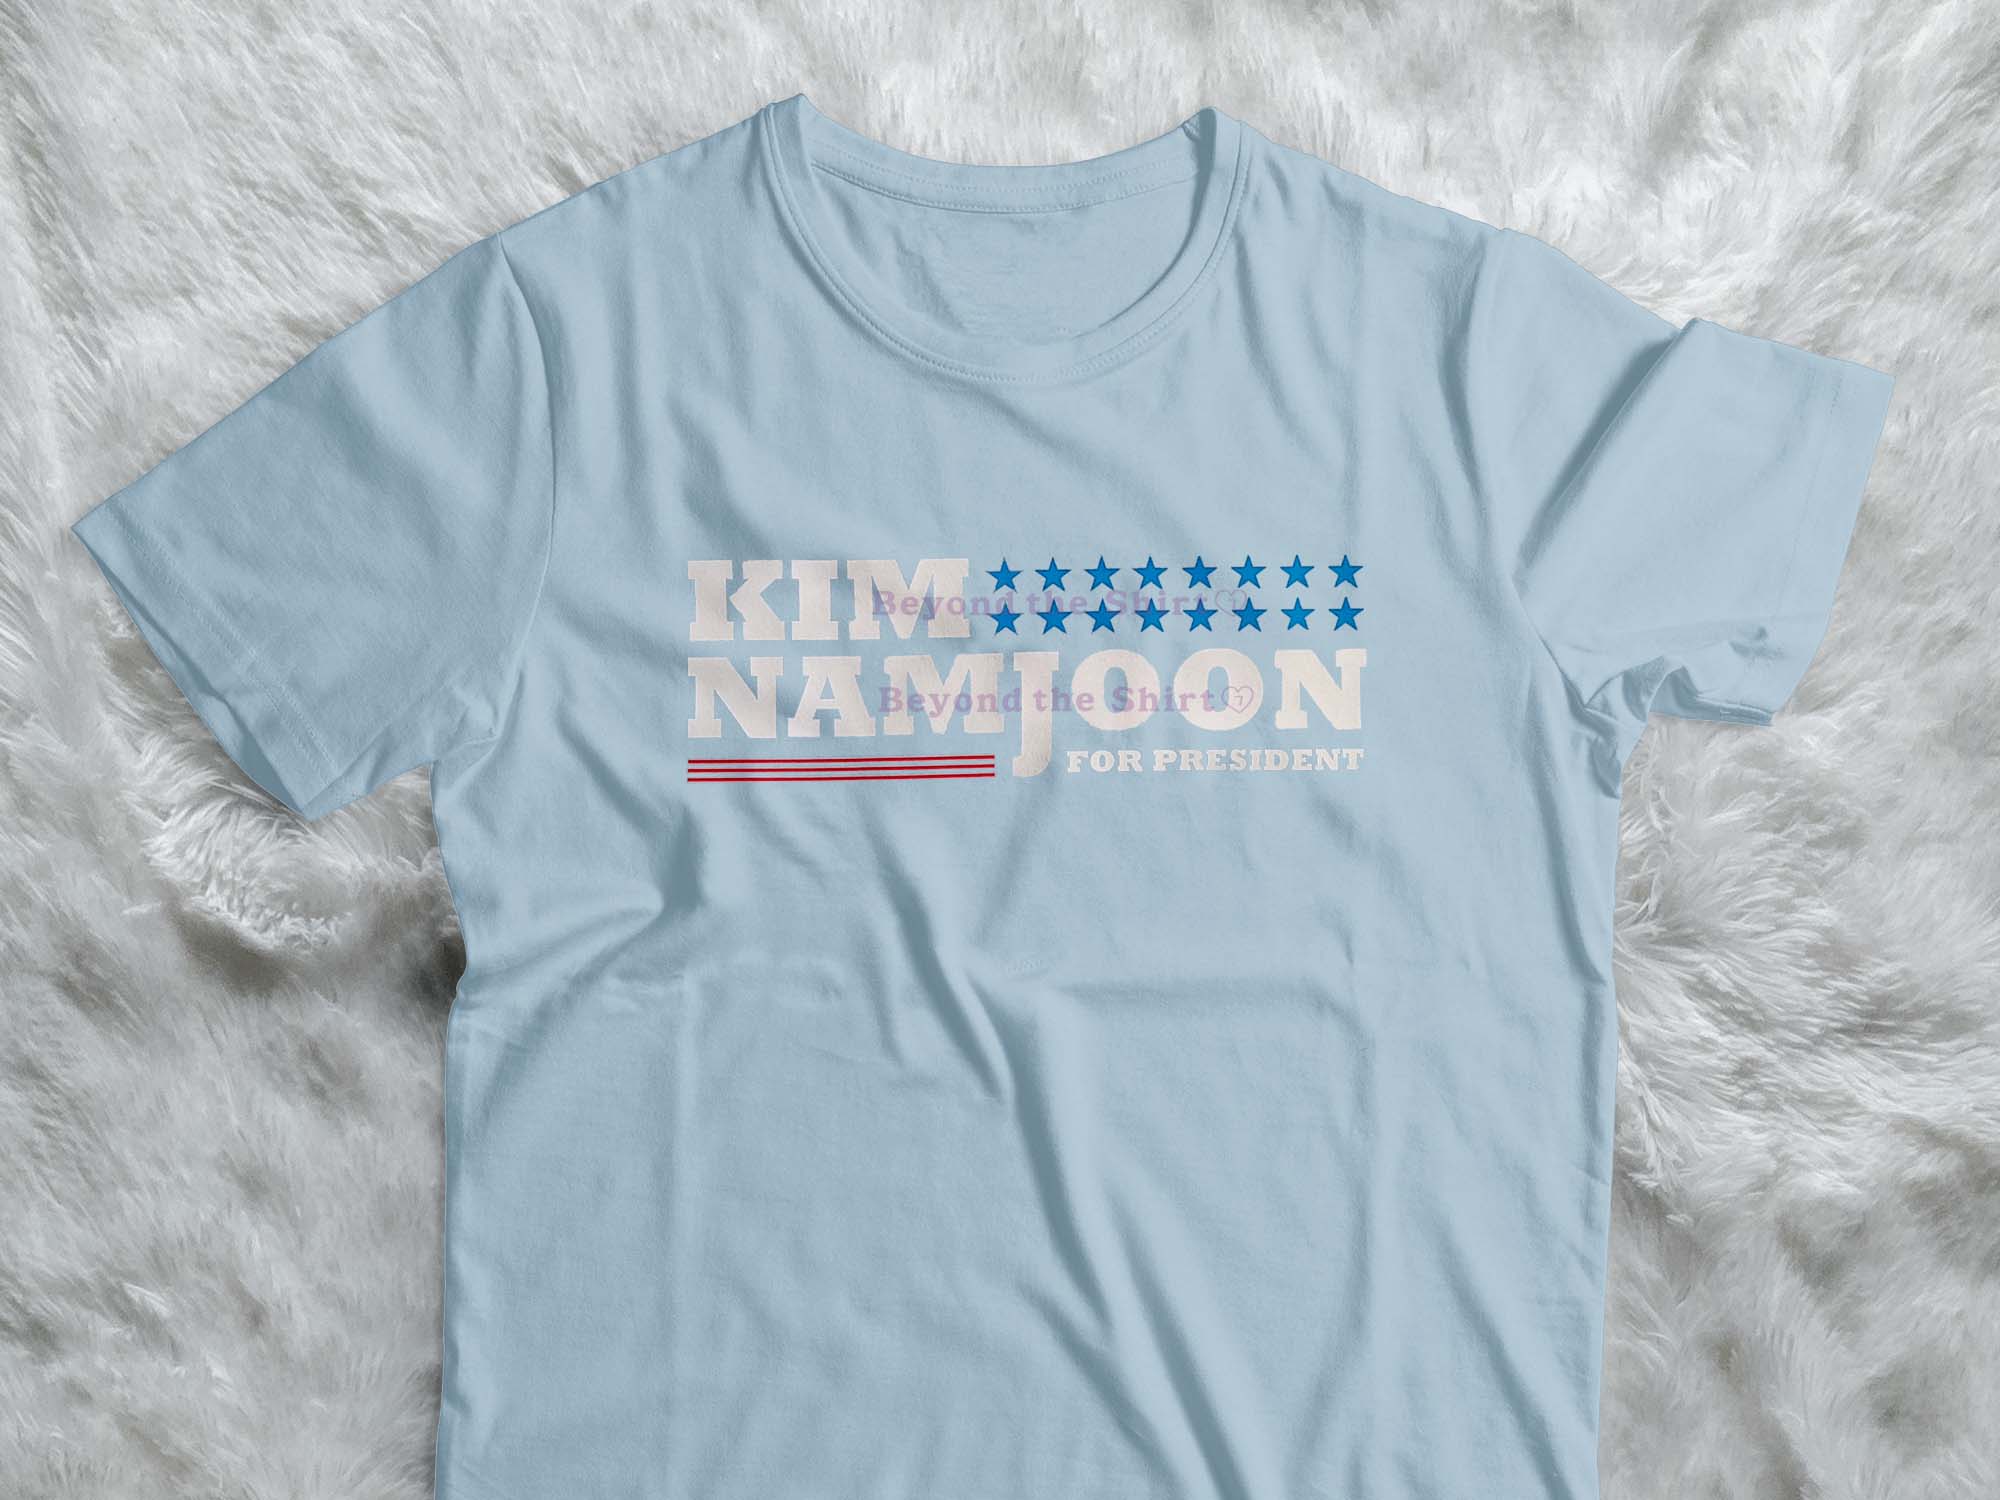 Namjoon for President T-Shirt and Crop